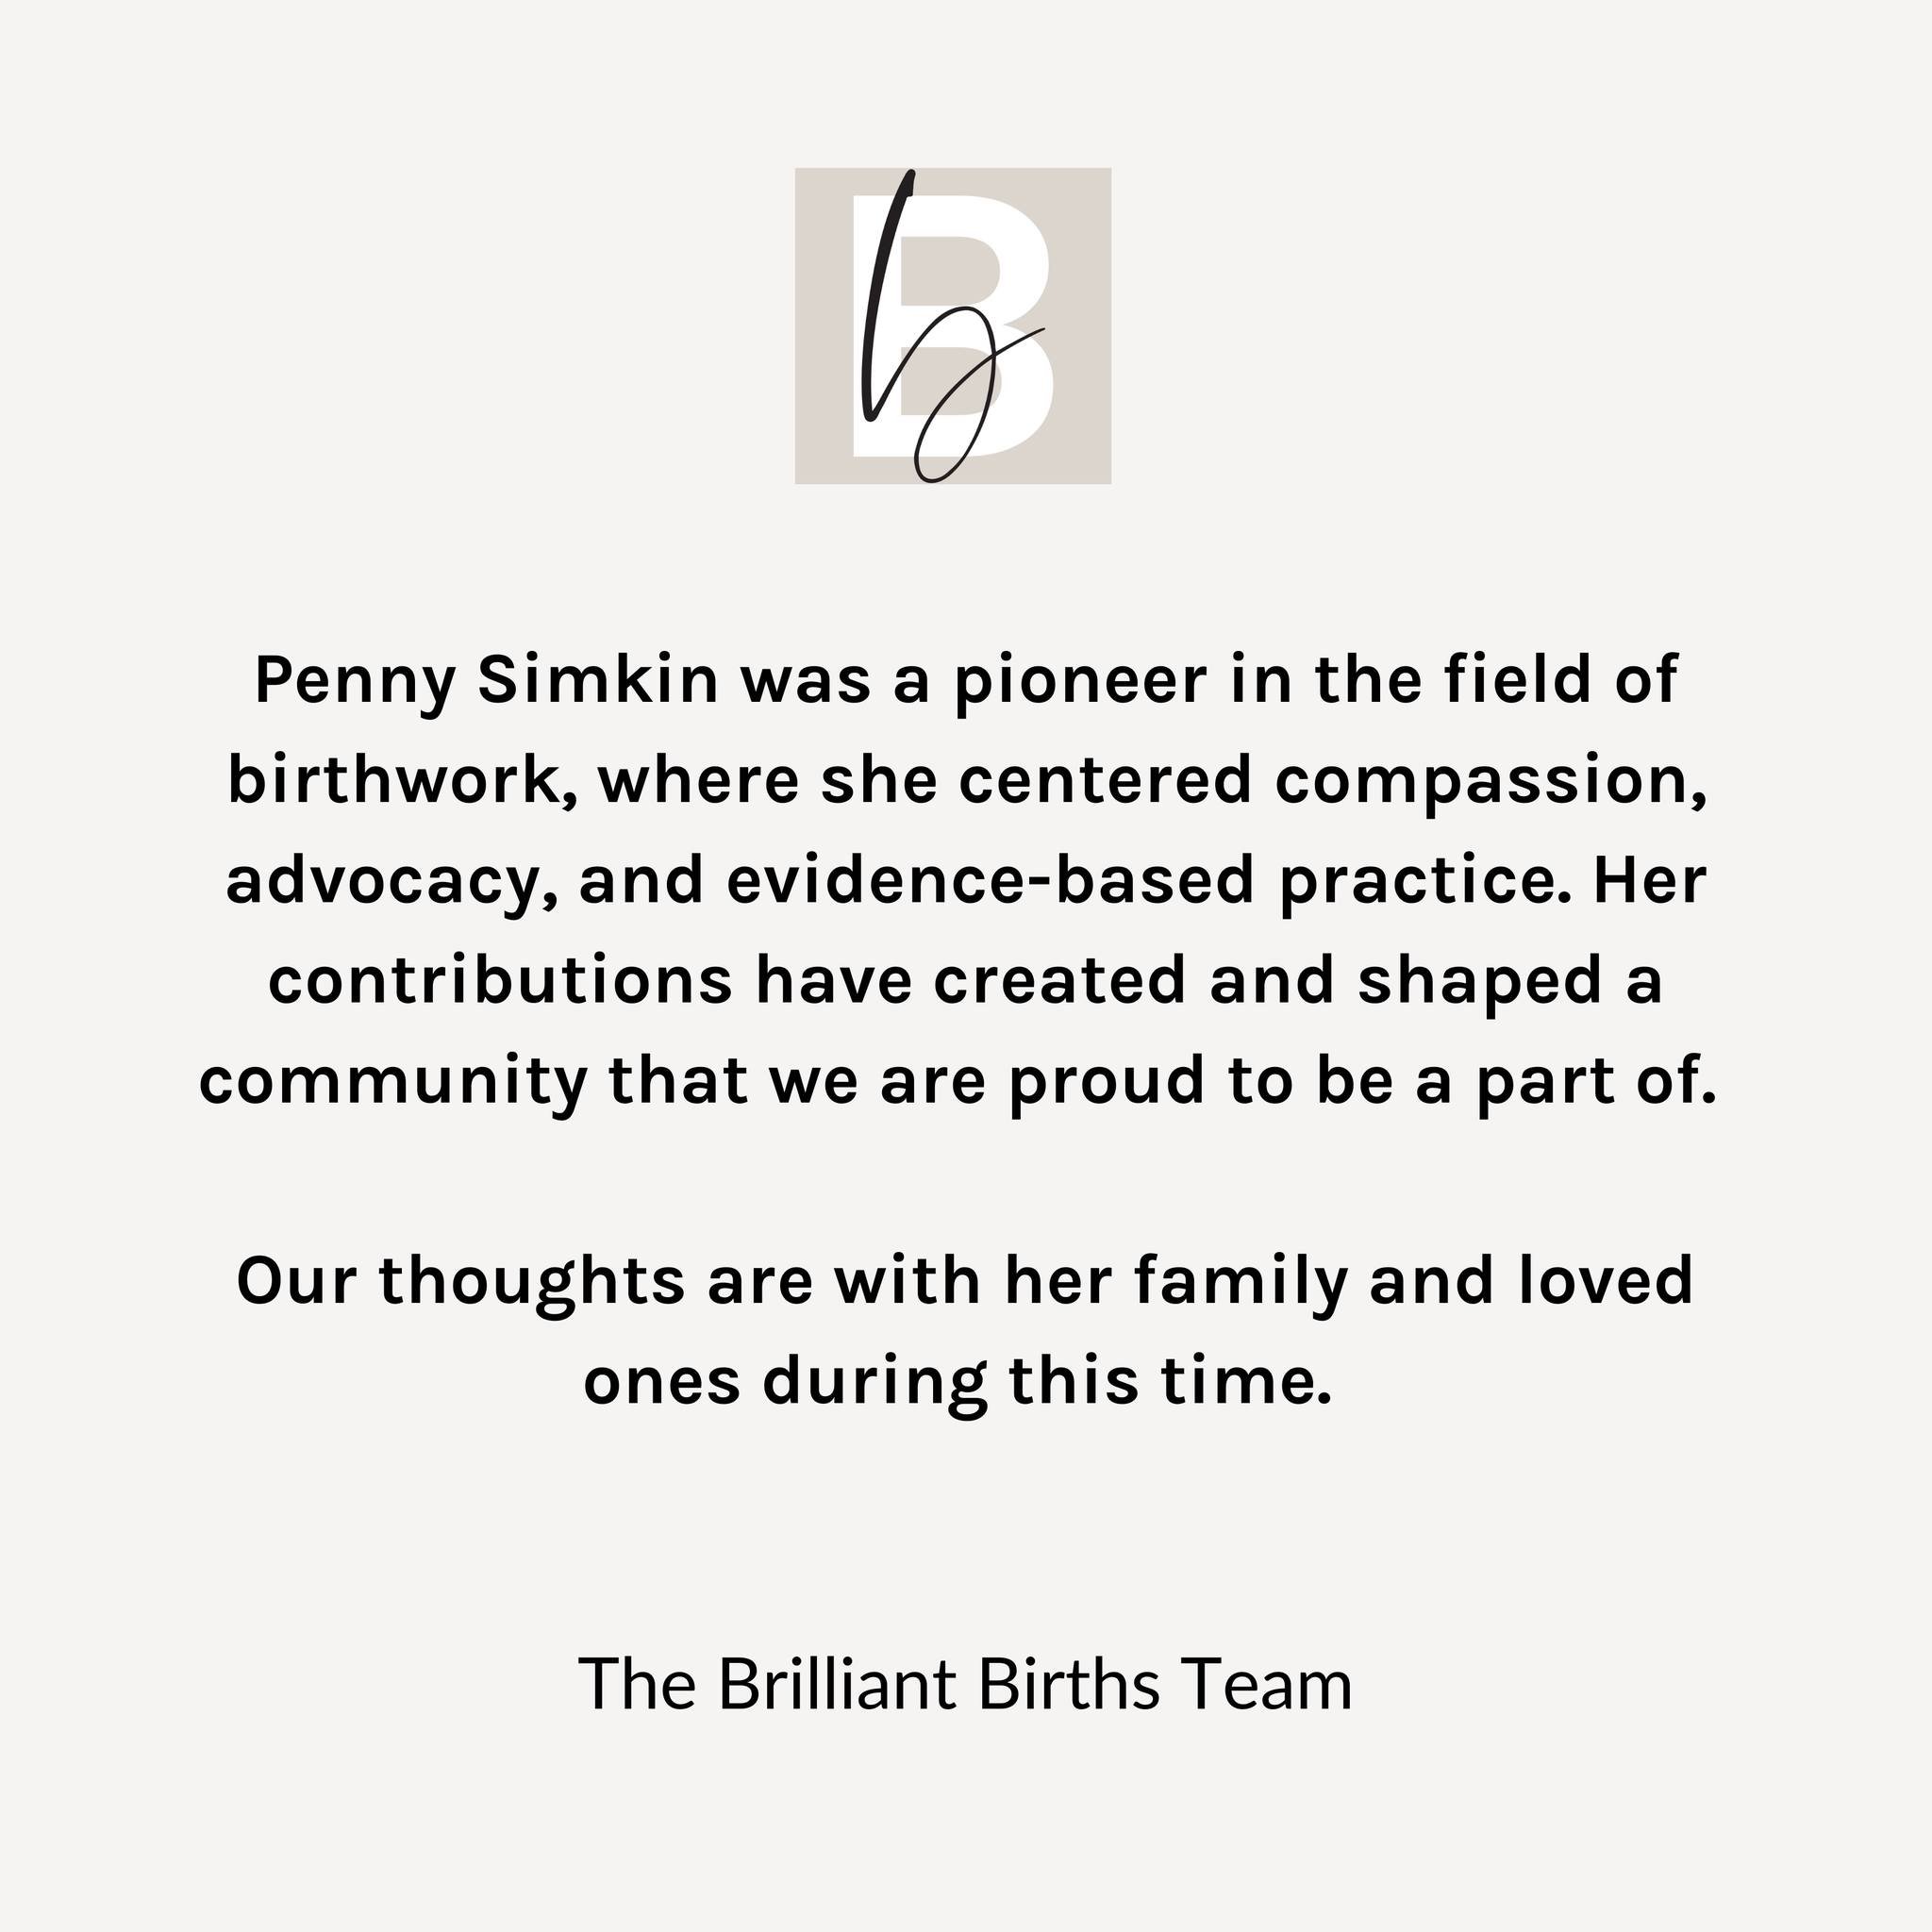 Penny Simkin, DONA's cofounder and a pillar in the birthwork world, passed away today. 
Our thoughts are with her family and loved ones. 

#PennySimkin #DONAPROUD #doulawork